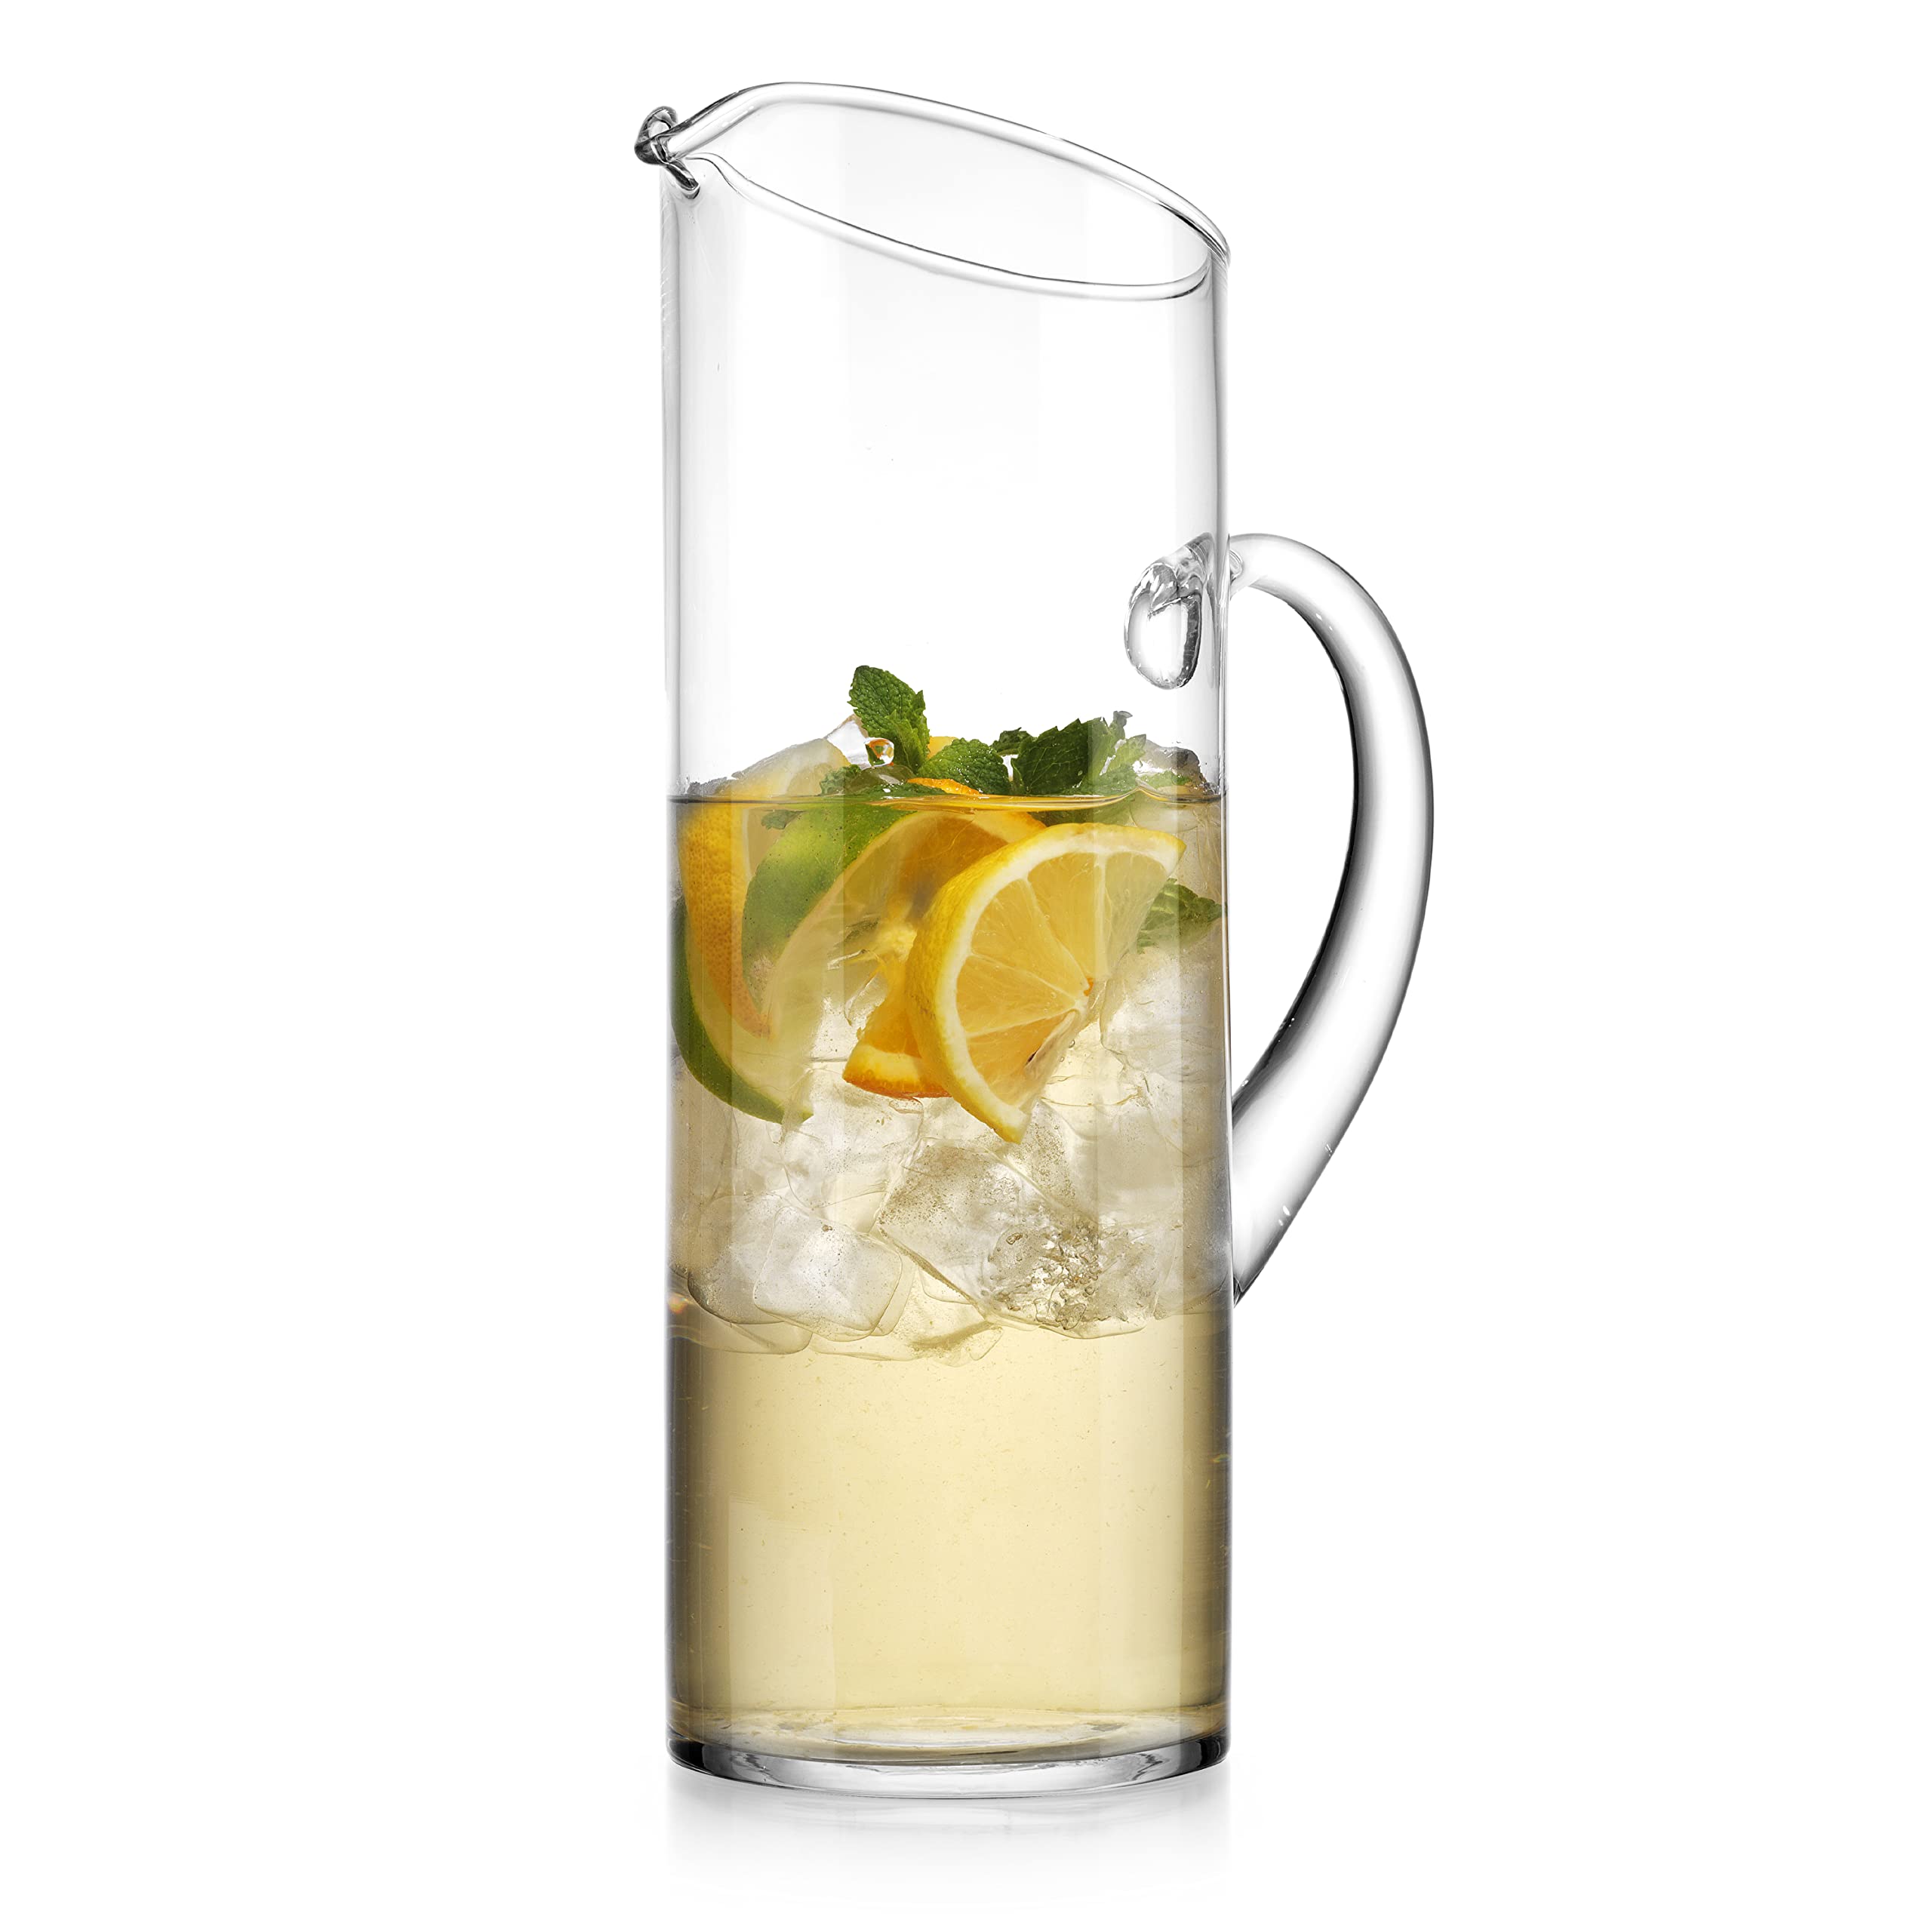 Glass Water Pitcher with Spout � Elegant Serving Carafe for Water, Juice, Sangria, Lemonade, and Cocktails � Crystal-Clear Glass Beverage Pitcher.  - Acceptable